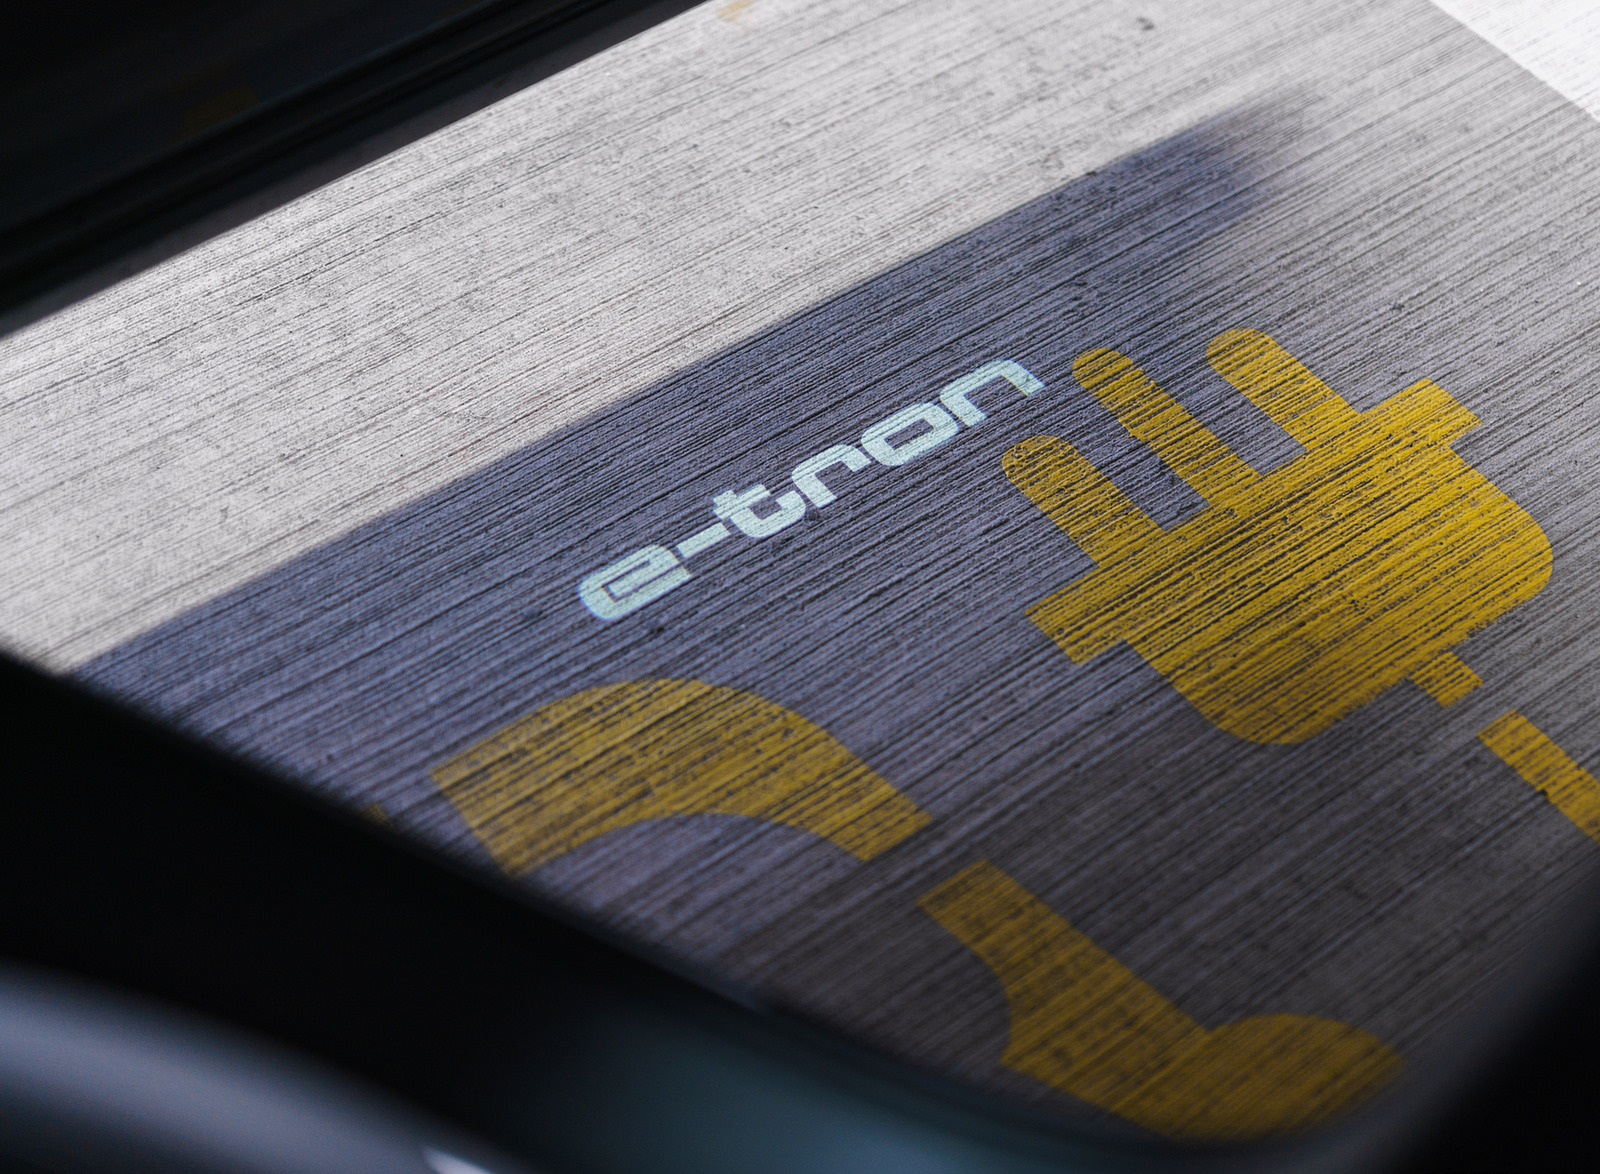 2021 Audi e-tron S Sportback (UK-Spec) Ground Projection Wallpapers  #87 of 119